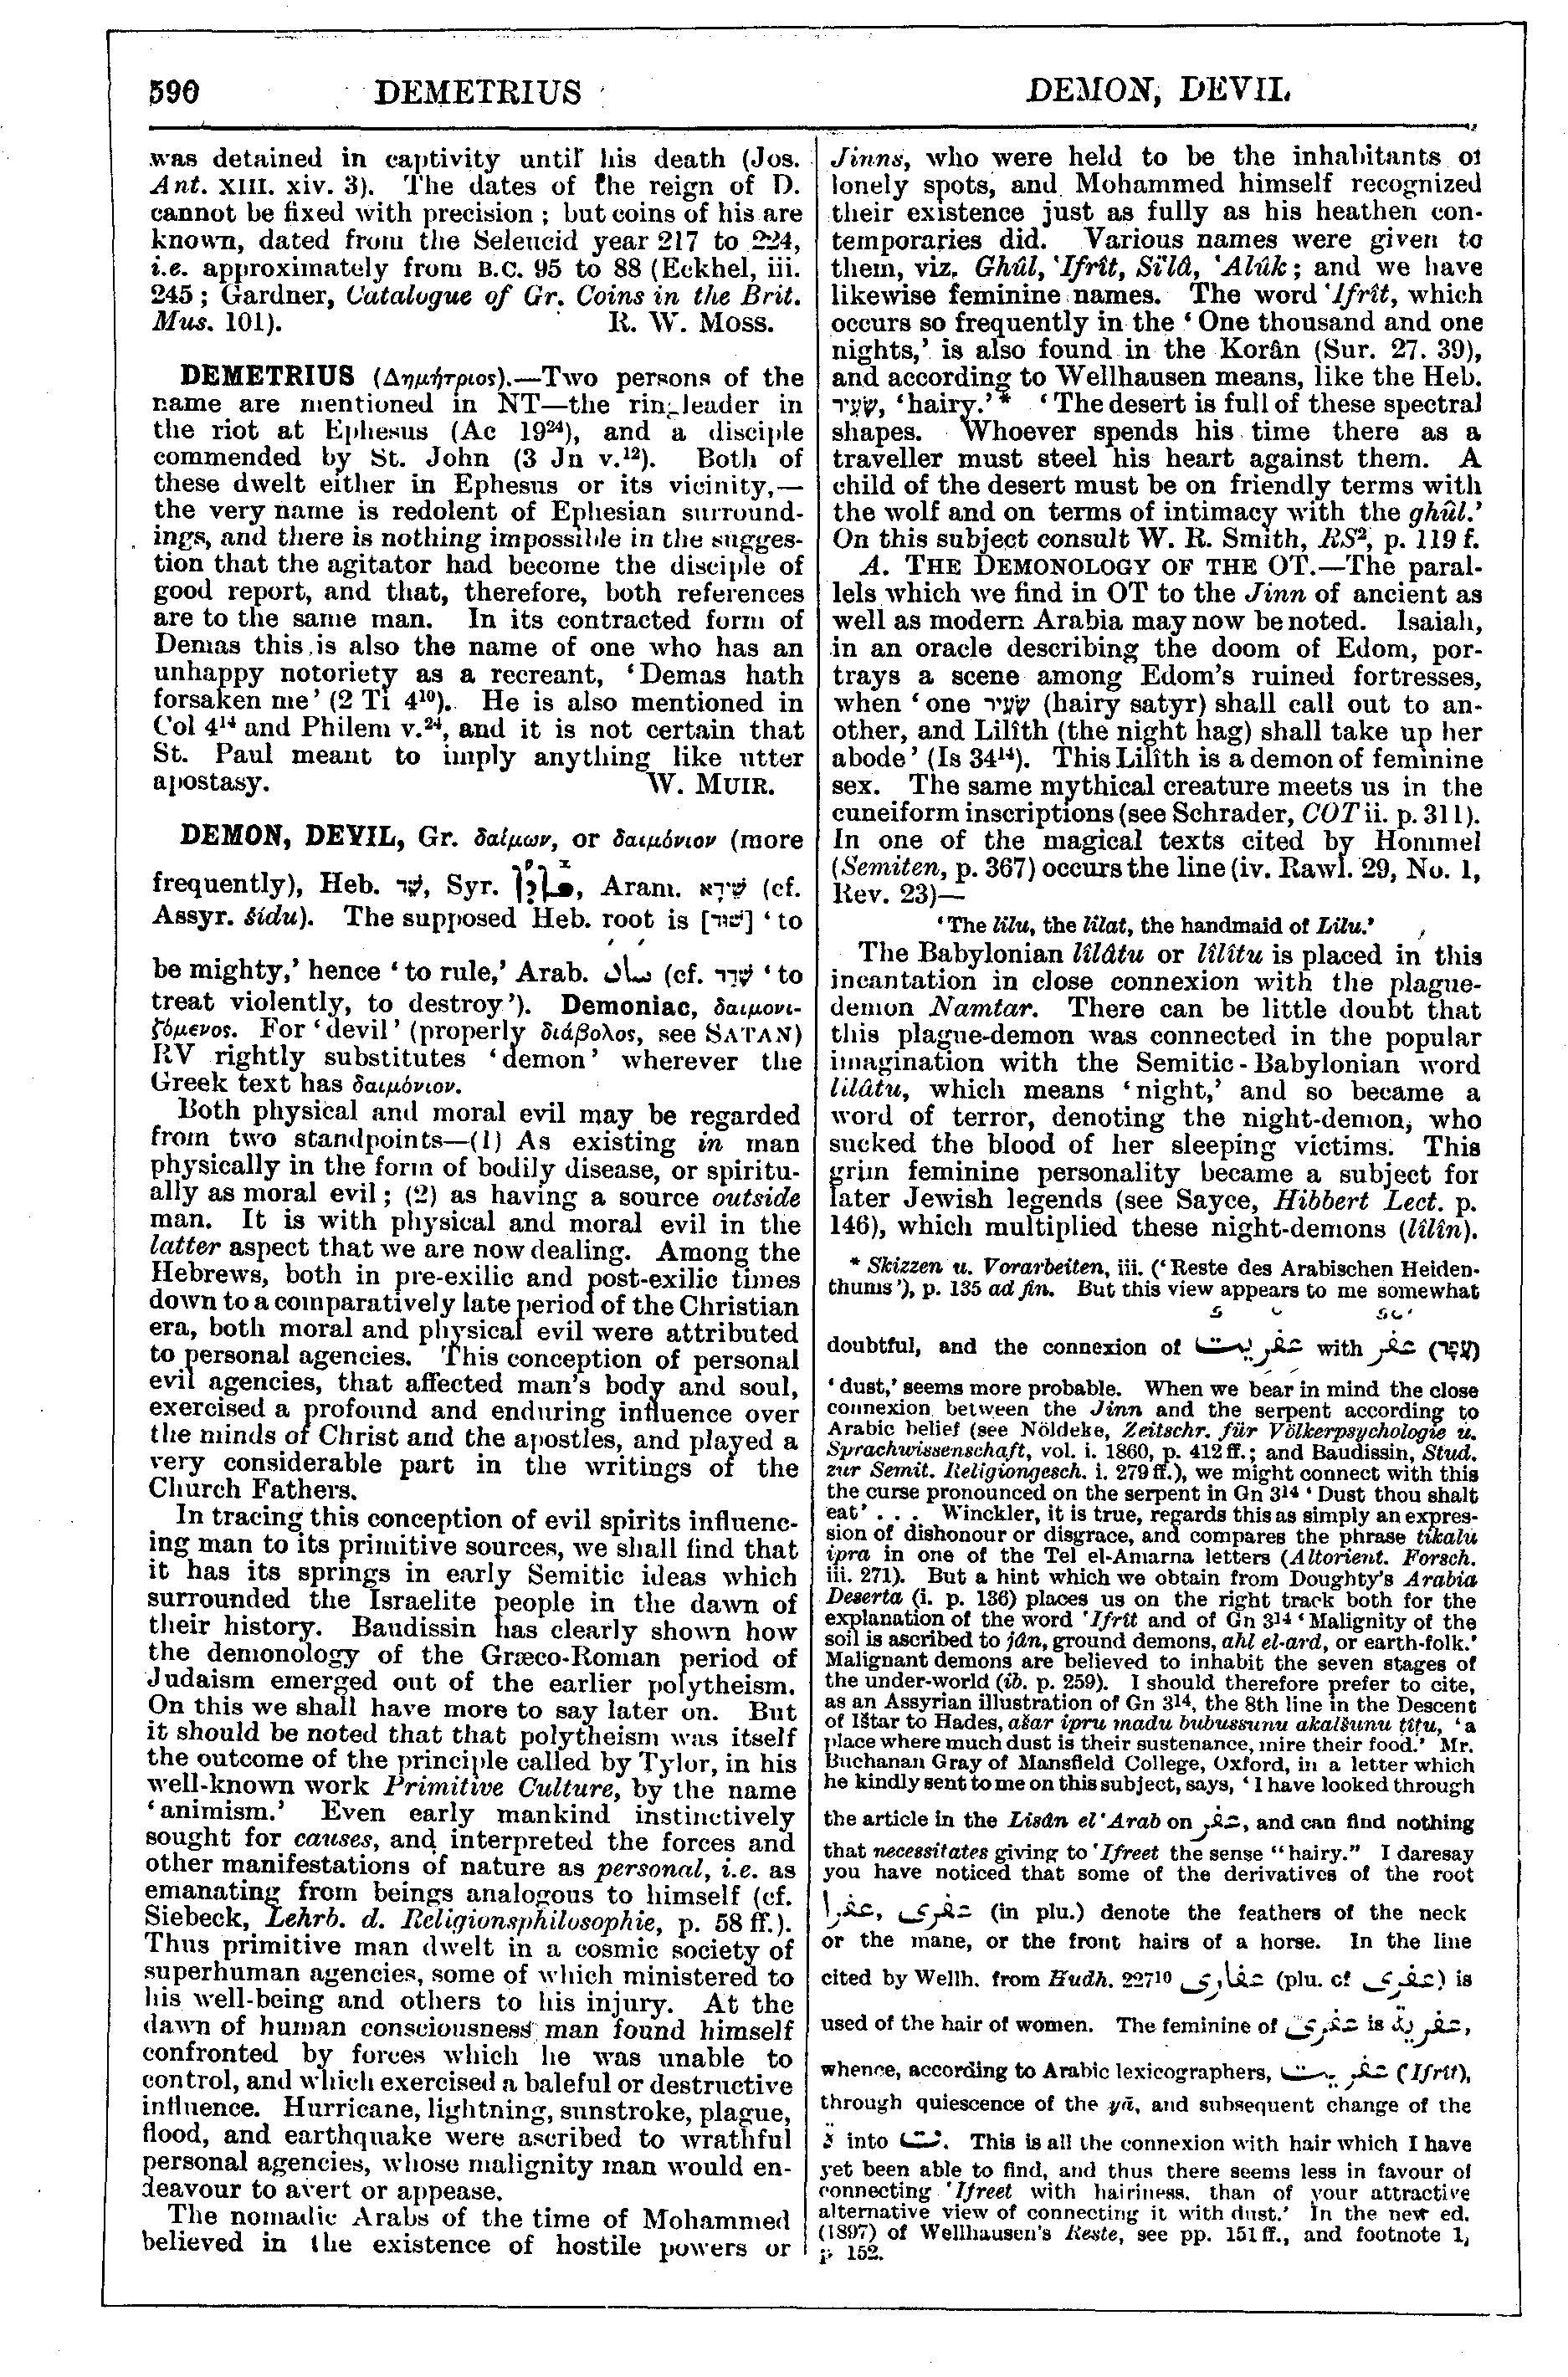 Image of page 590